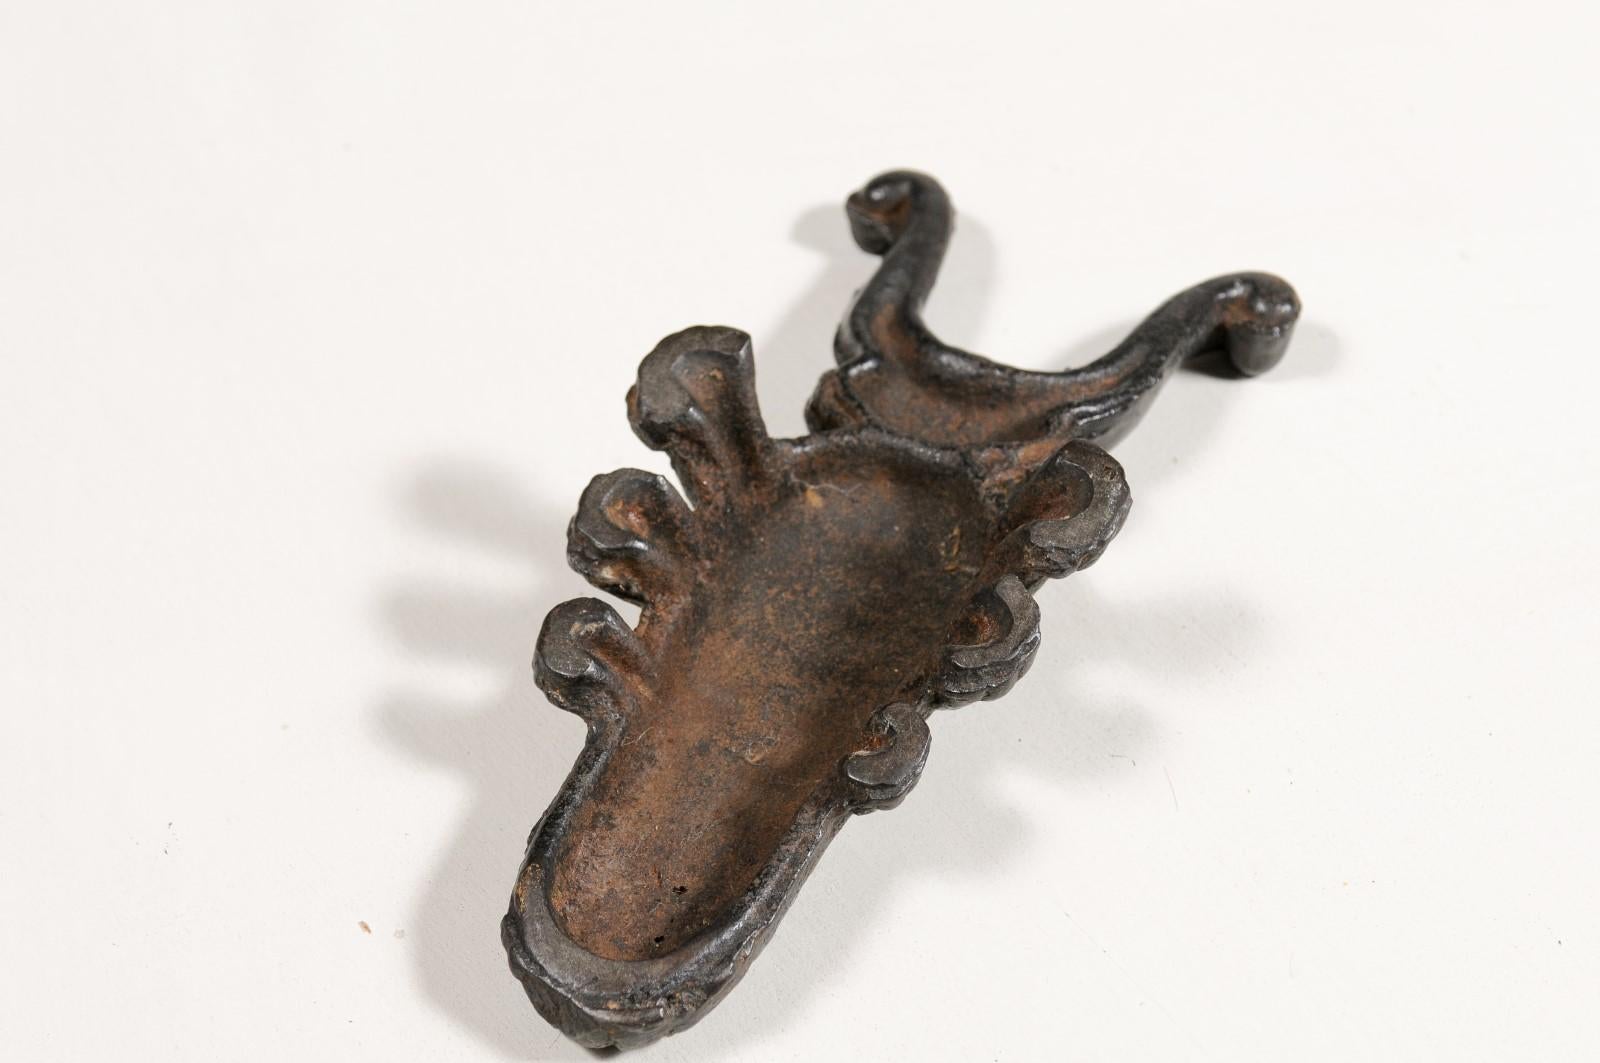 19th Century English Victorian Iron Bootjack Depicting a Cricket with Antennae 6